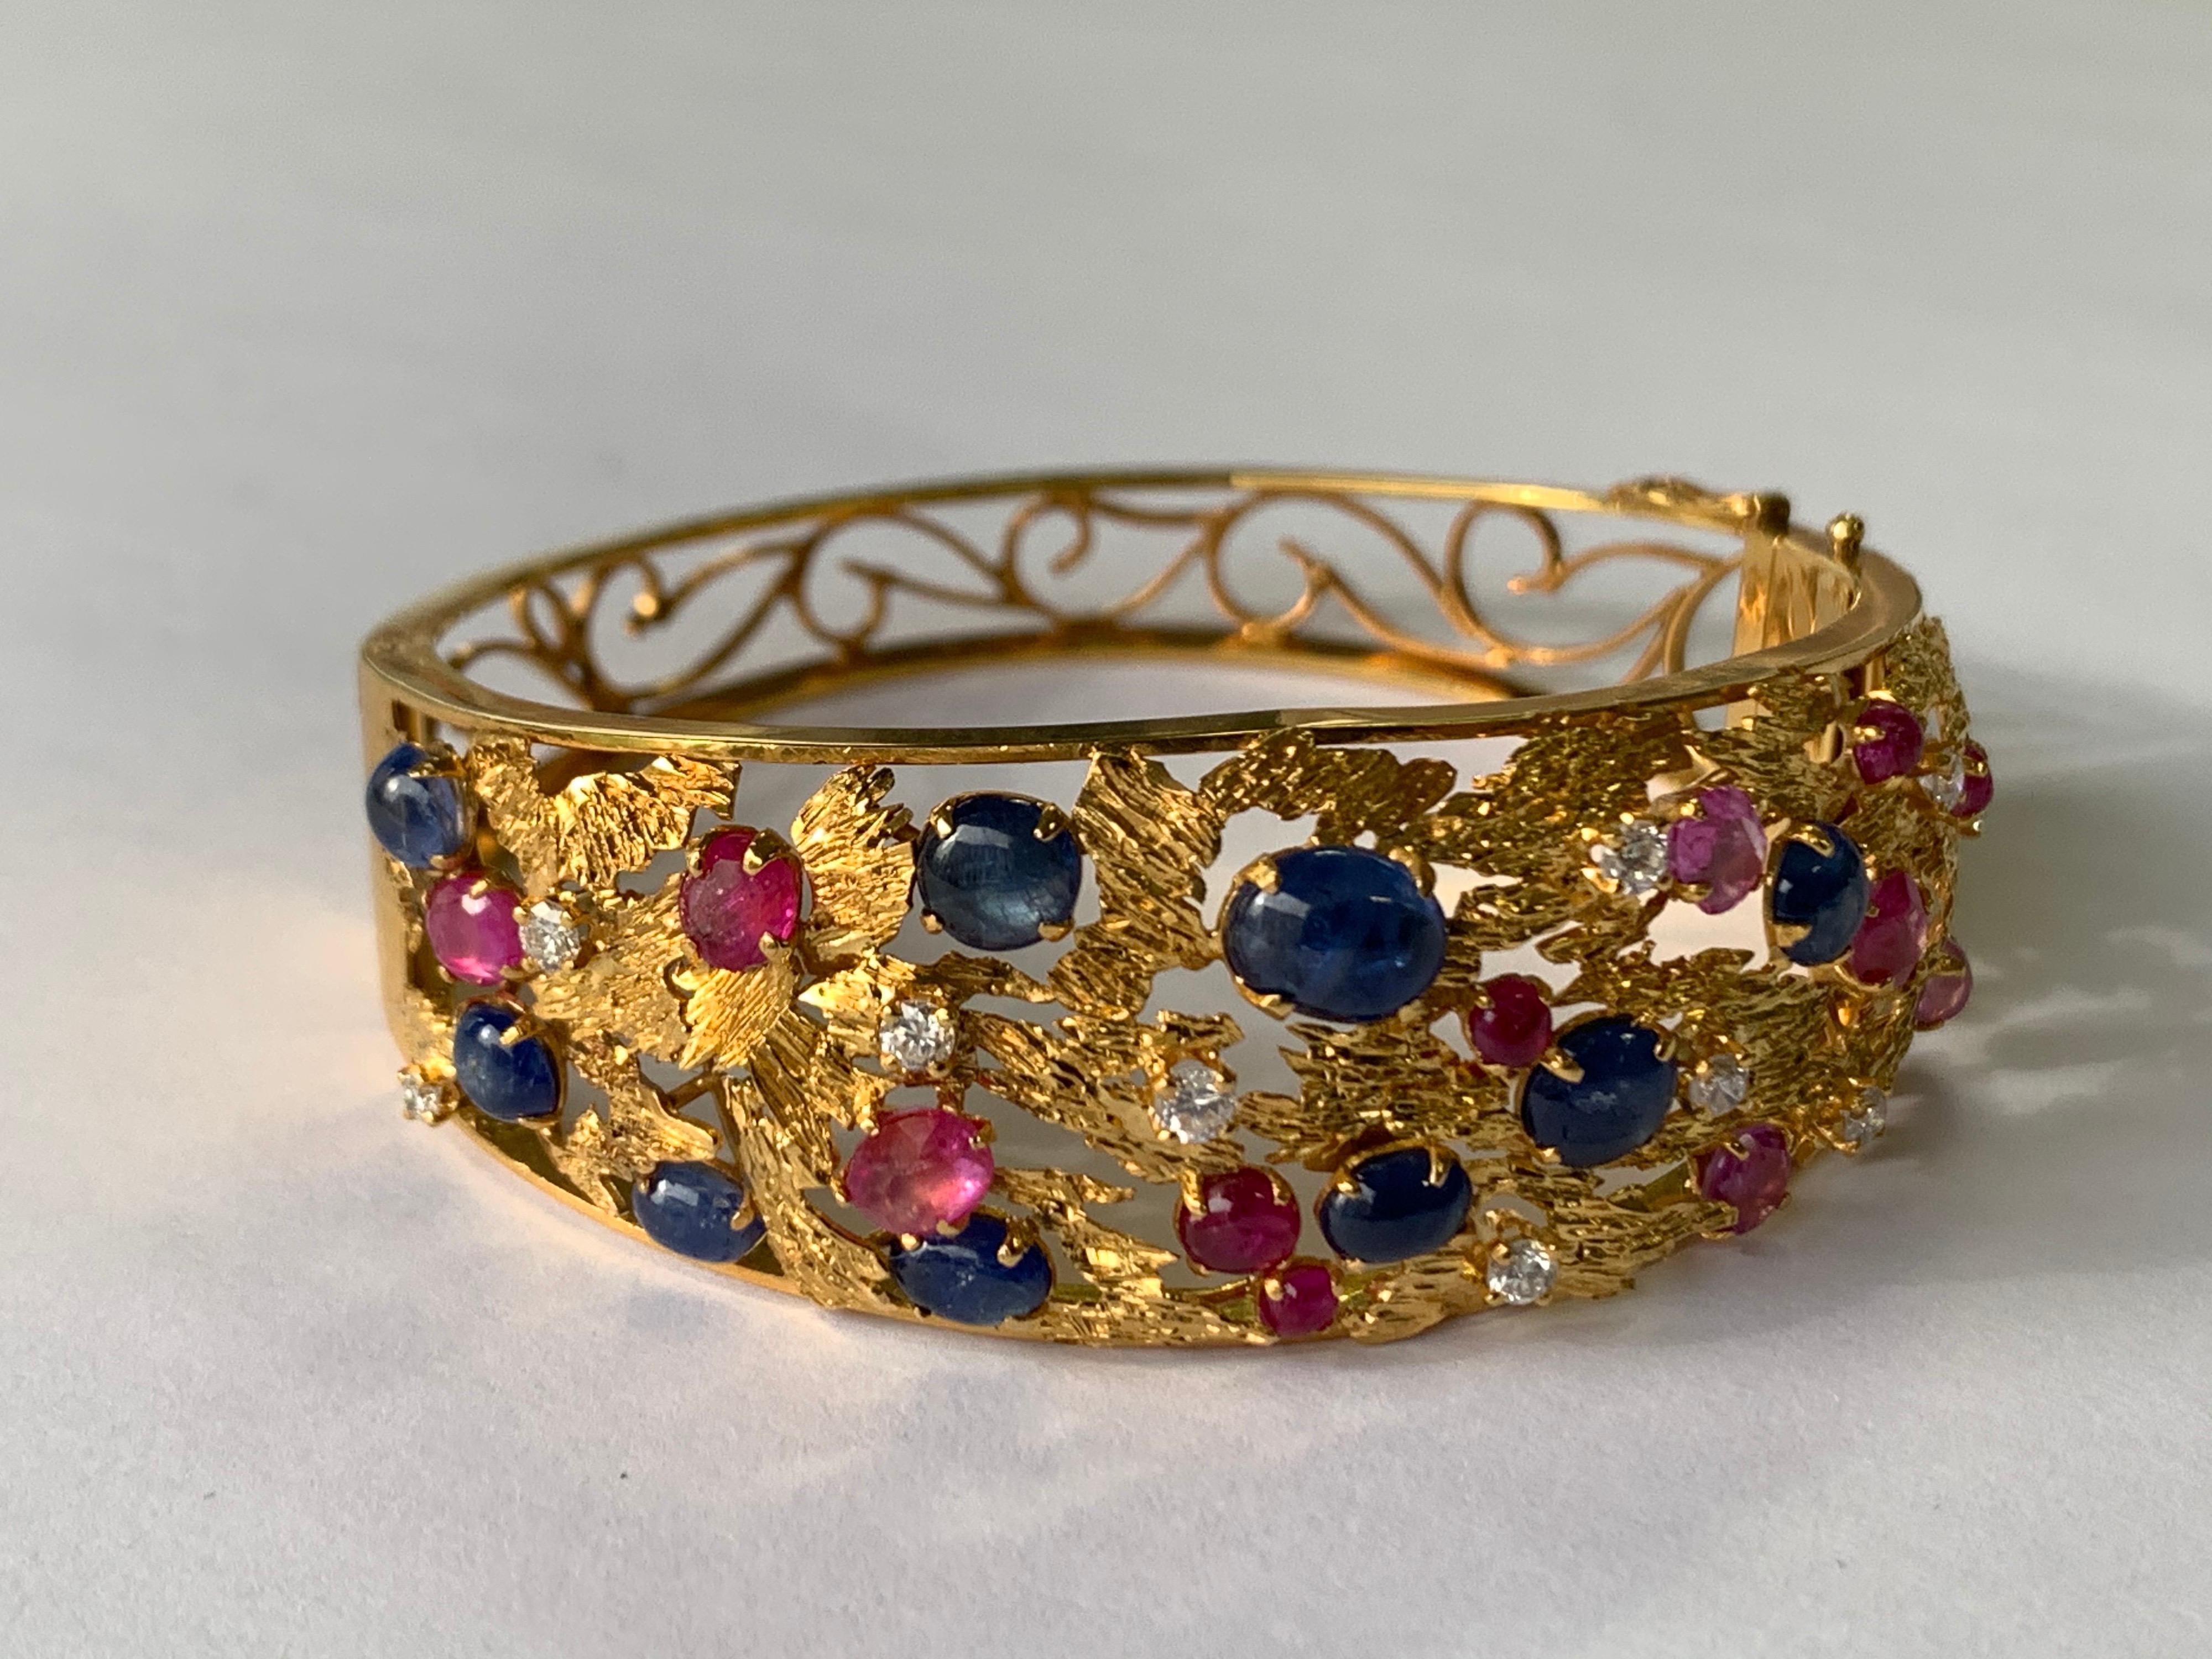 Stunning 14K Yellow Gold Retro Bangle weighing 27.09 grams. 

The Bracelet consists of 10 Natural Round Brilliant Diamonds (colorless, VS-SI, appx 0.60 carats), 12 Natural Rubies (faceted&Cabochon, appx 2.10 carats), and 9 natural Cabochon Sapphires